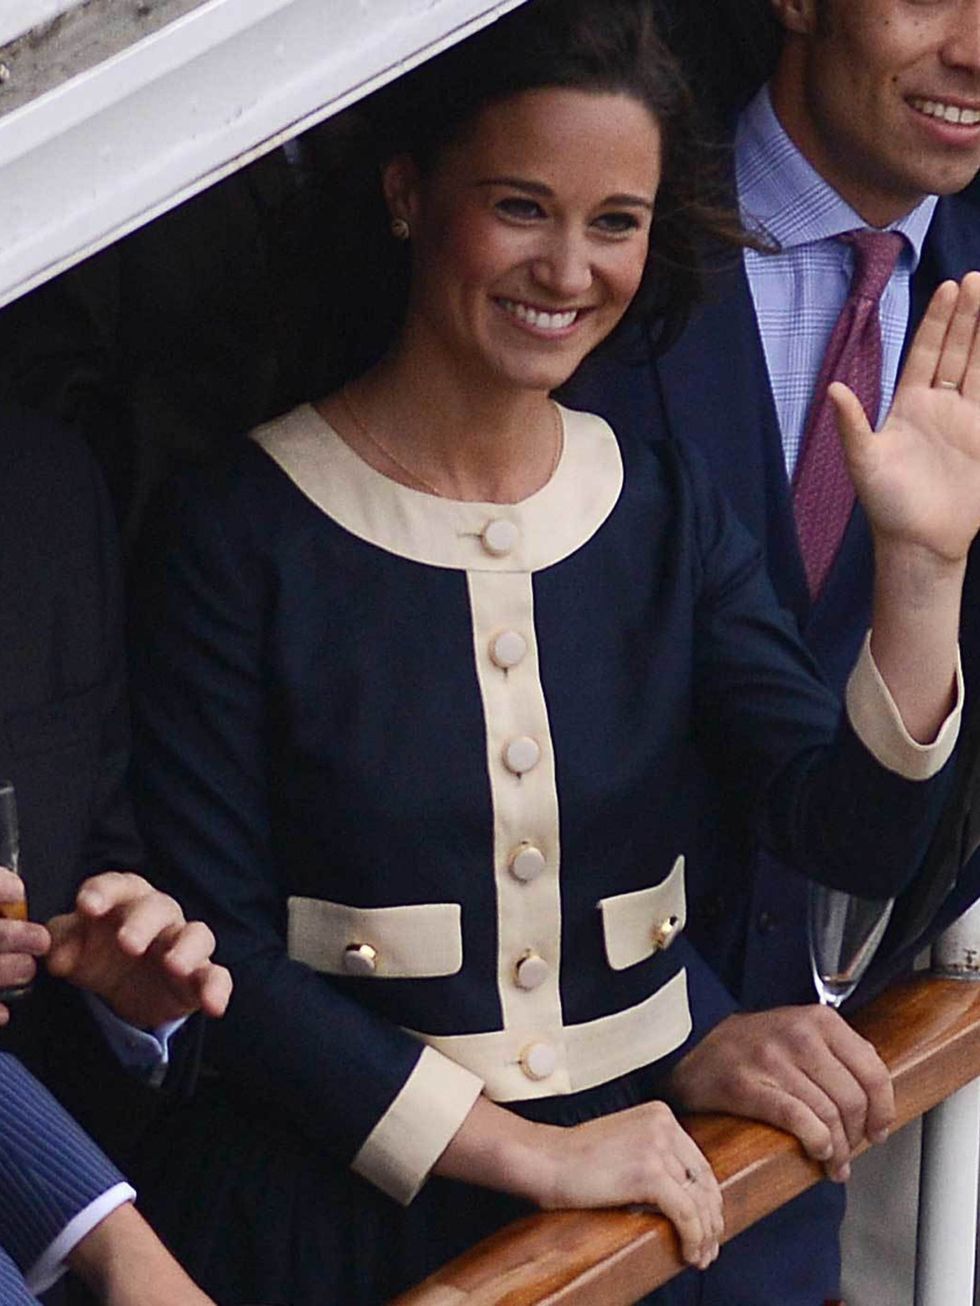 <p><a href="http://www.elleuk.com/star-style/celebrity-style-files/pippa-middleton">Pippa Middleton</a> in Orla Kiely on the Royal Jubilee flotilla during The Queen's Diamond Jubilee celebrations</p>